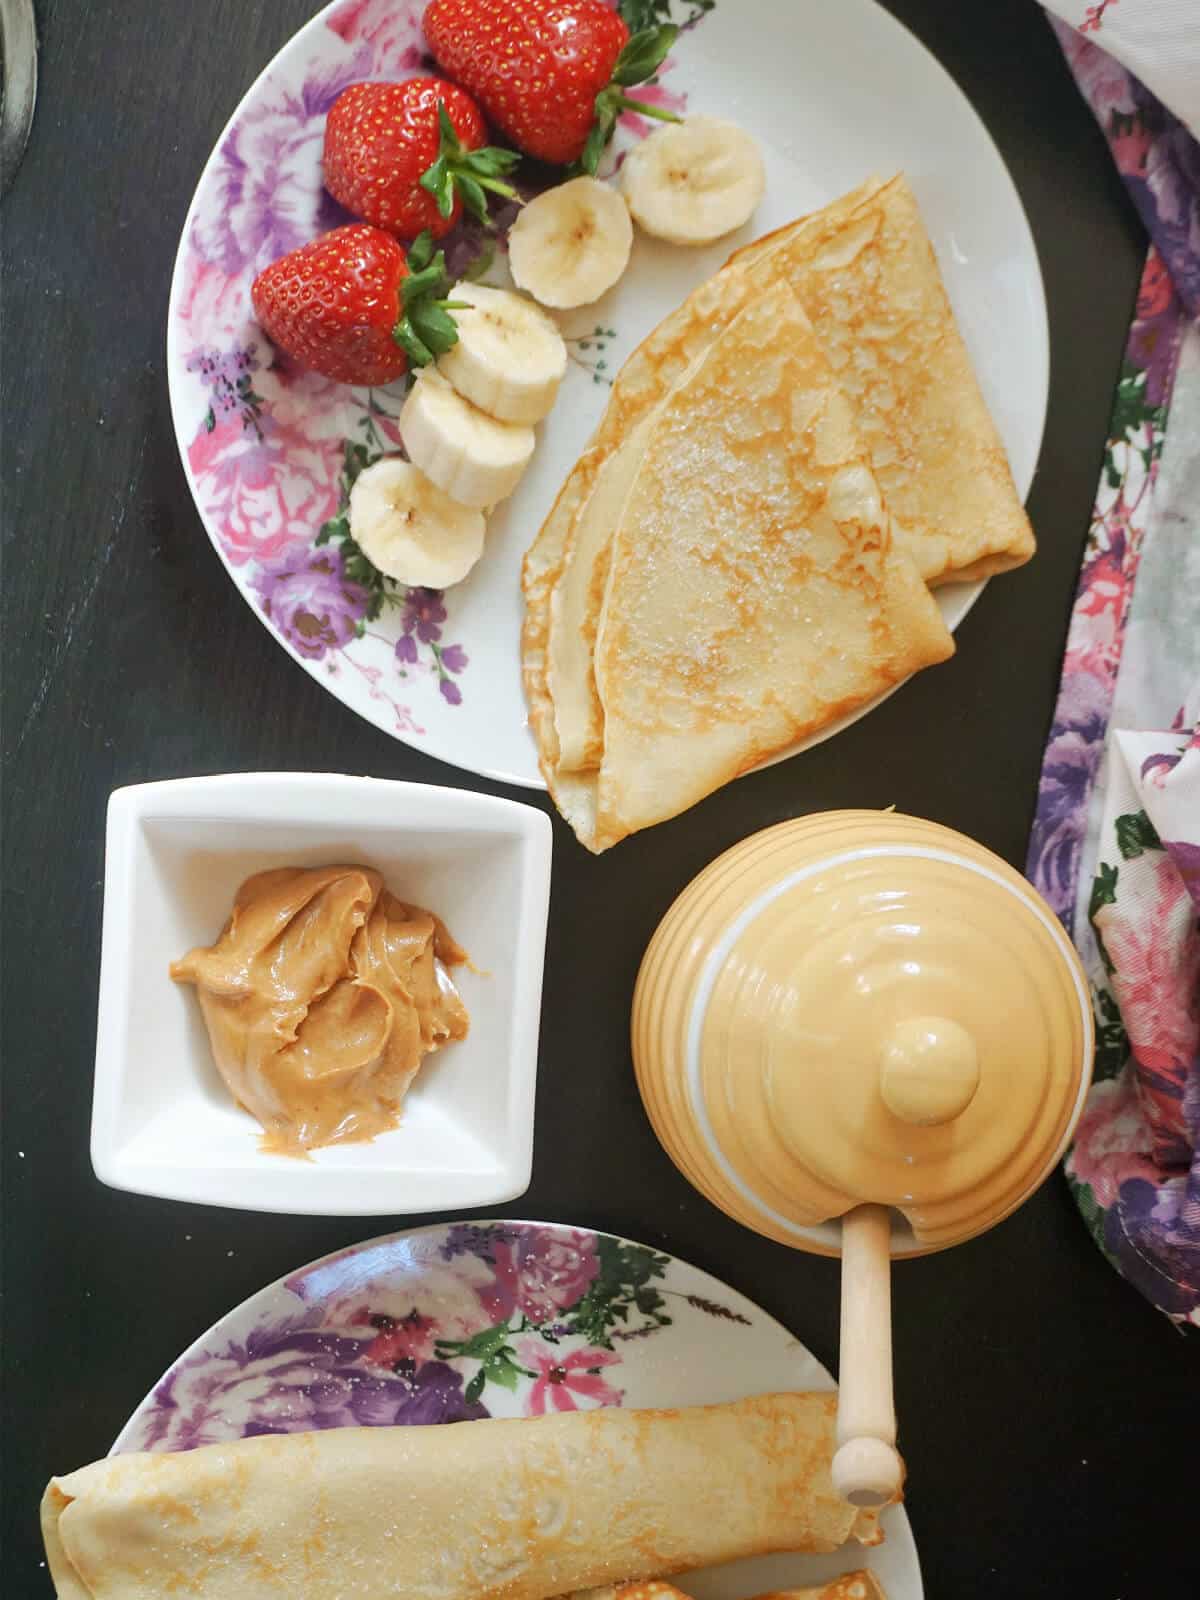 A white plate with 2 crepes, banana slices and strawberries, a ramekin with peanut butter, a honey oot and another plate with more crepes.